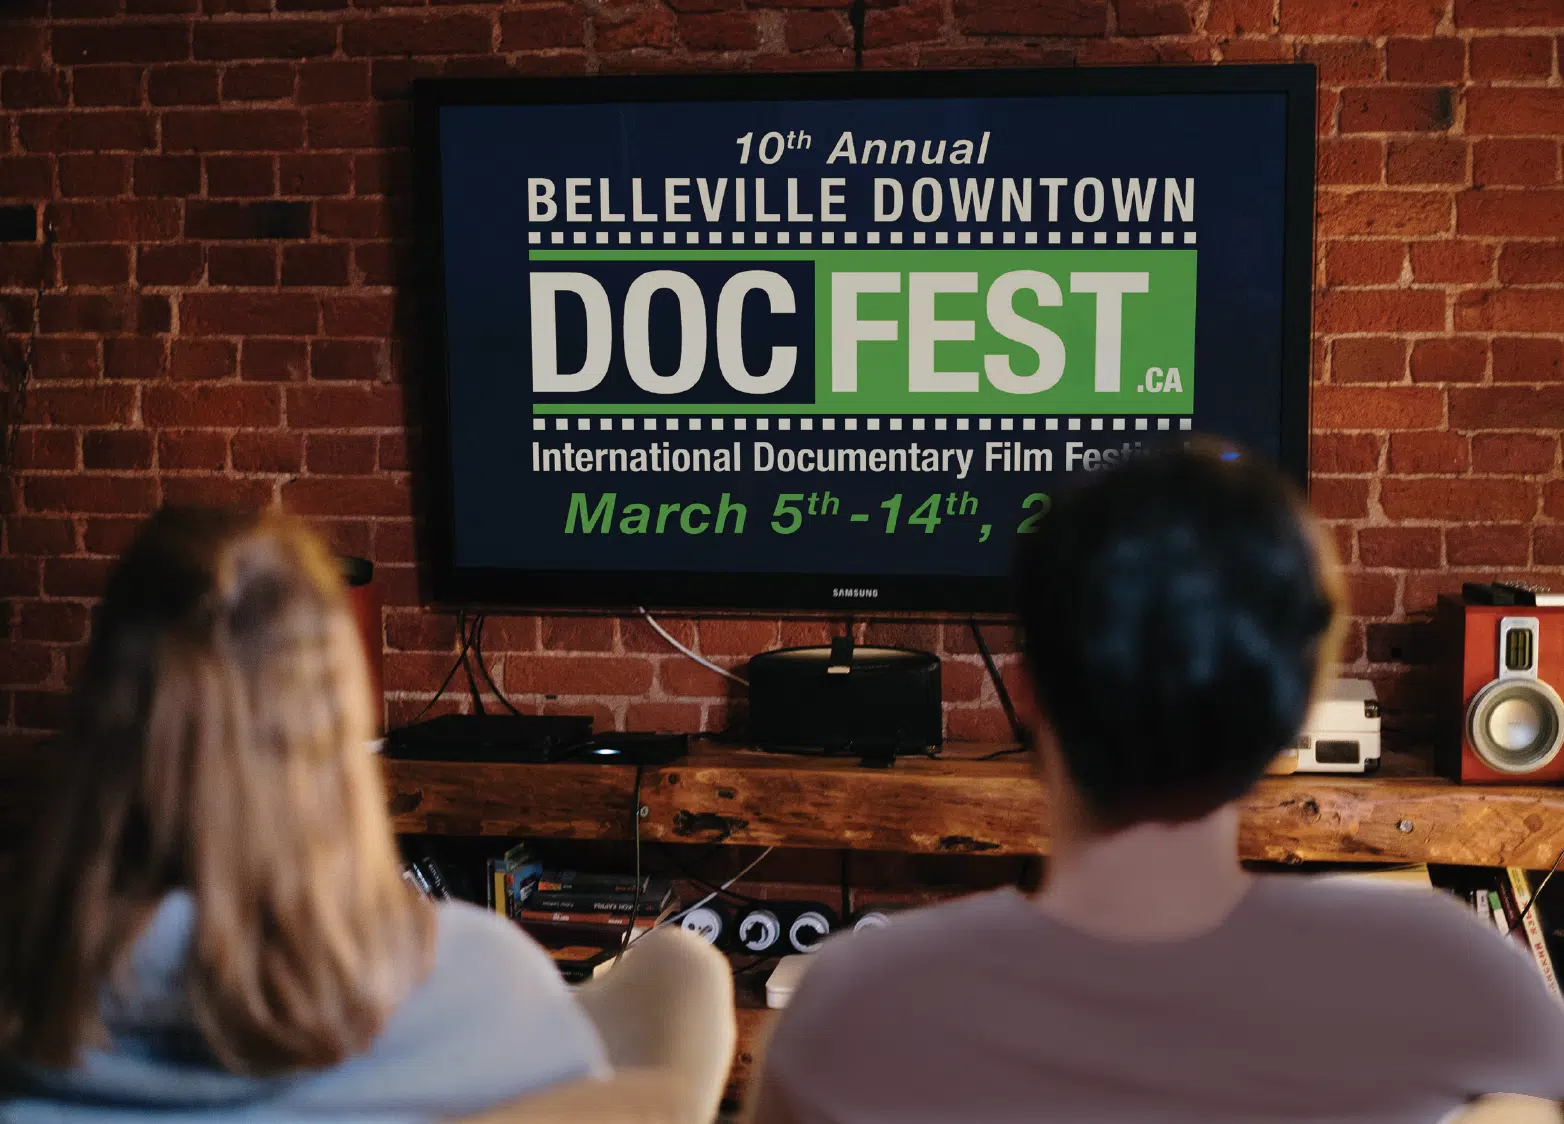 Belleville Downtown Docfest goes virtual for 10th anniversary